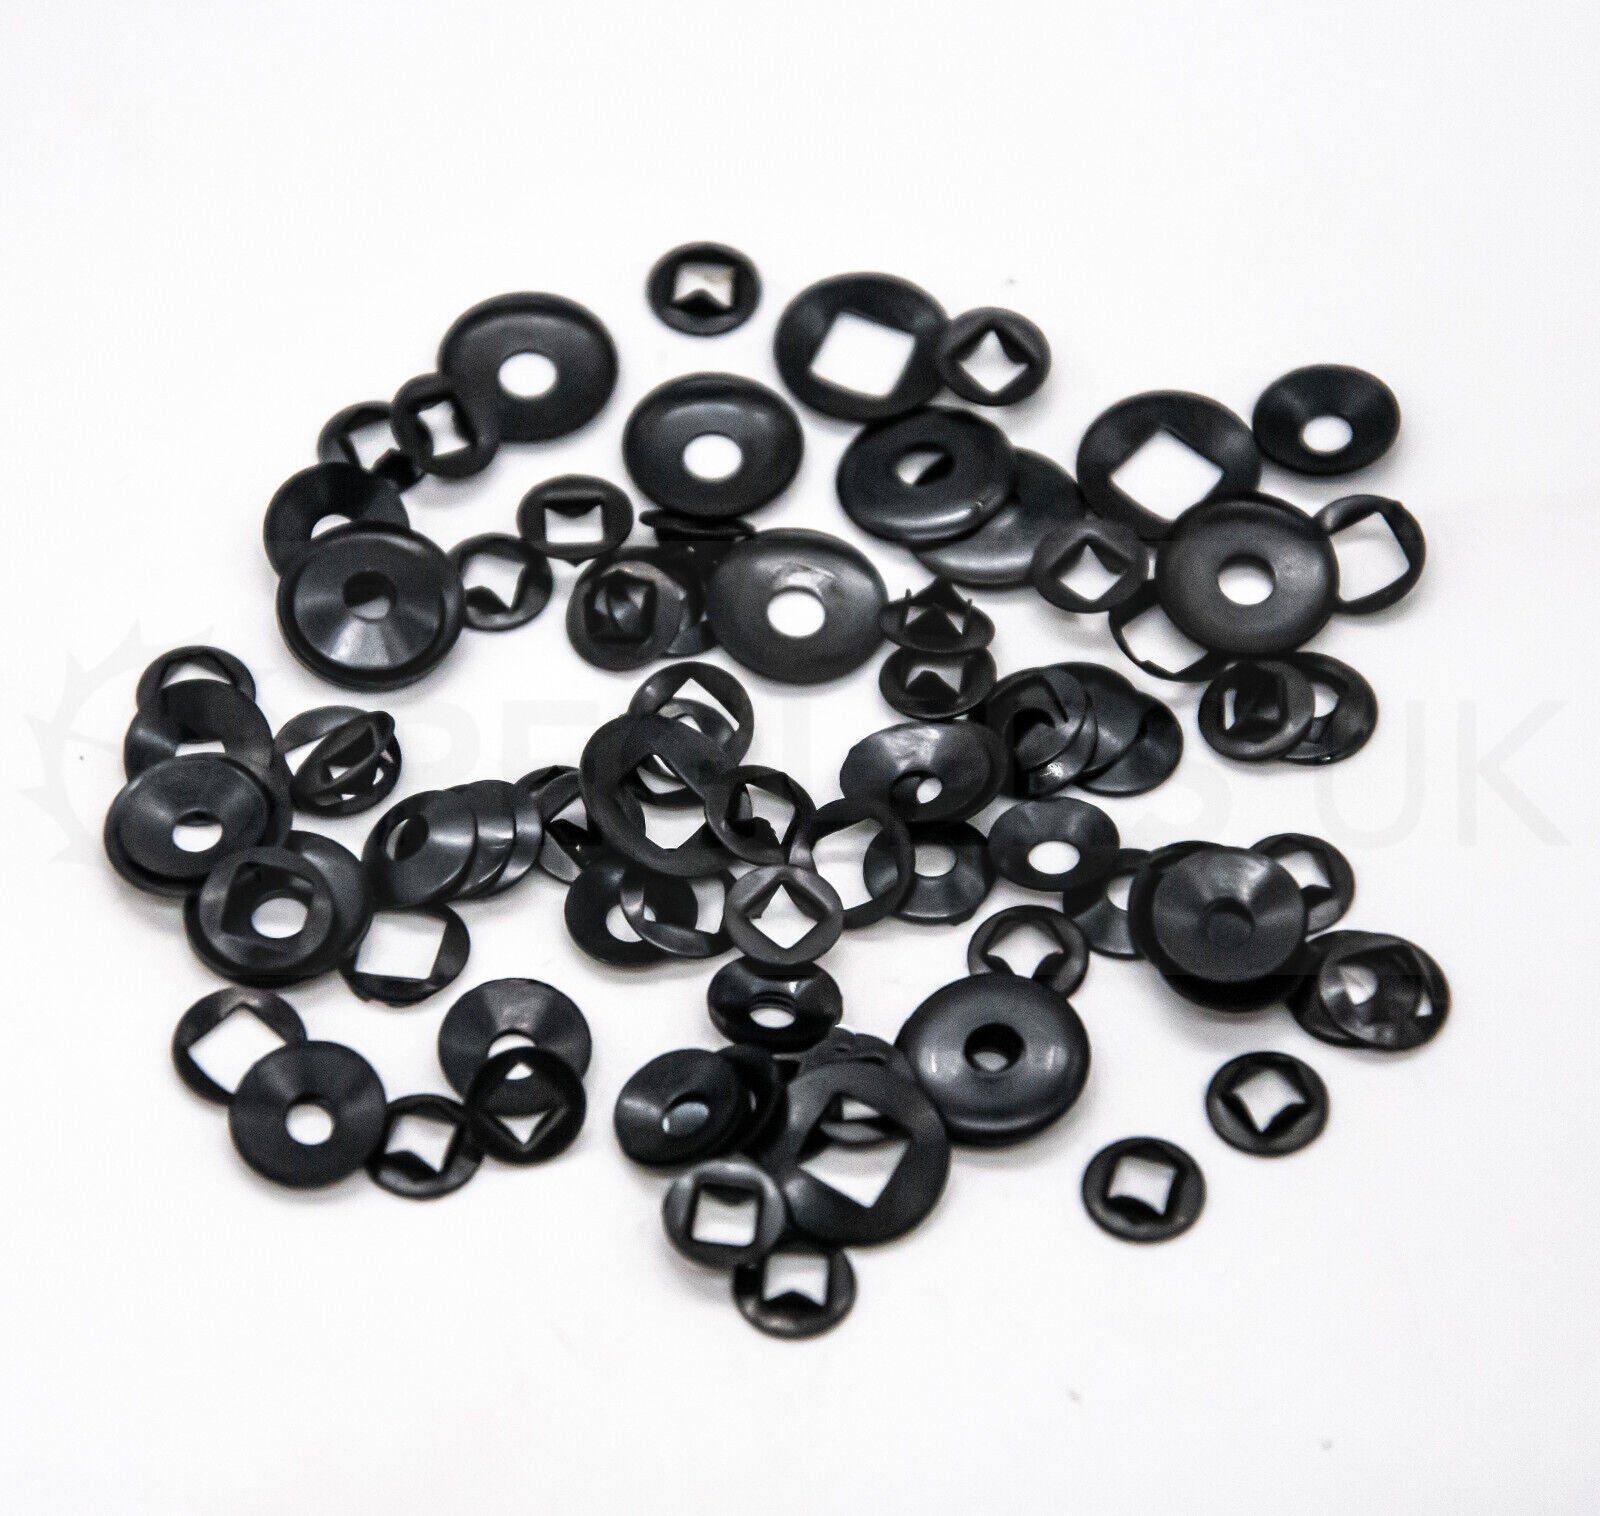 Domed Clock Washers, Black Oxidised Steel - Round & Square Holes